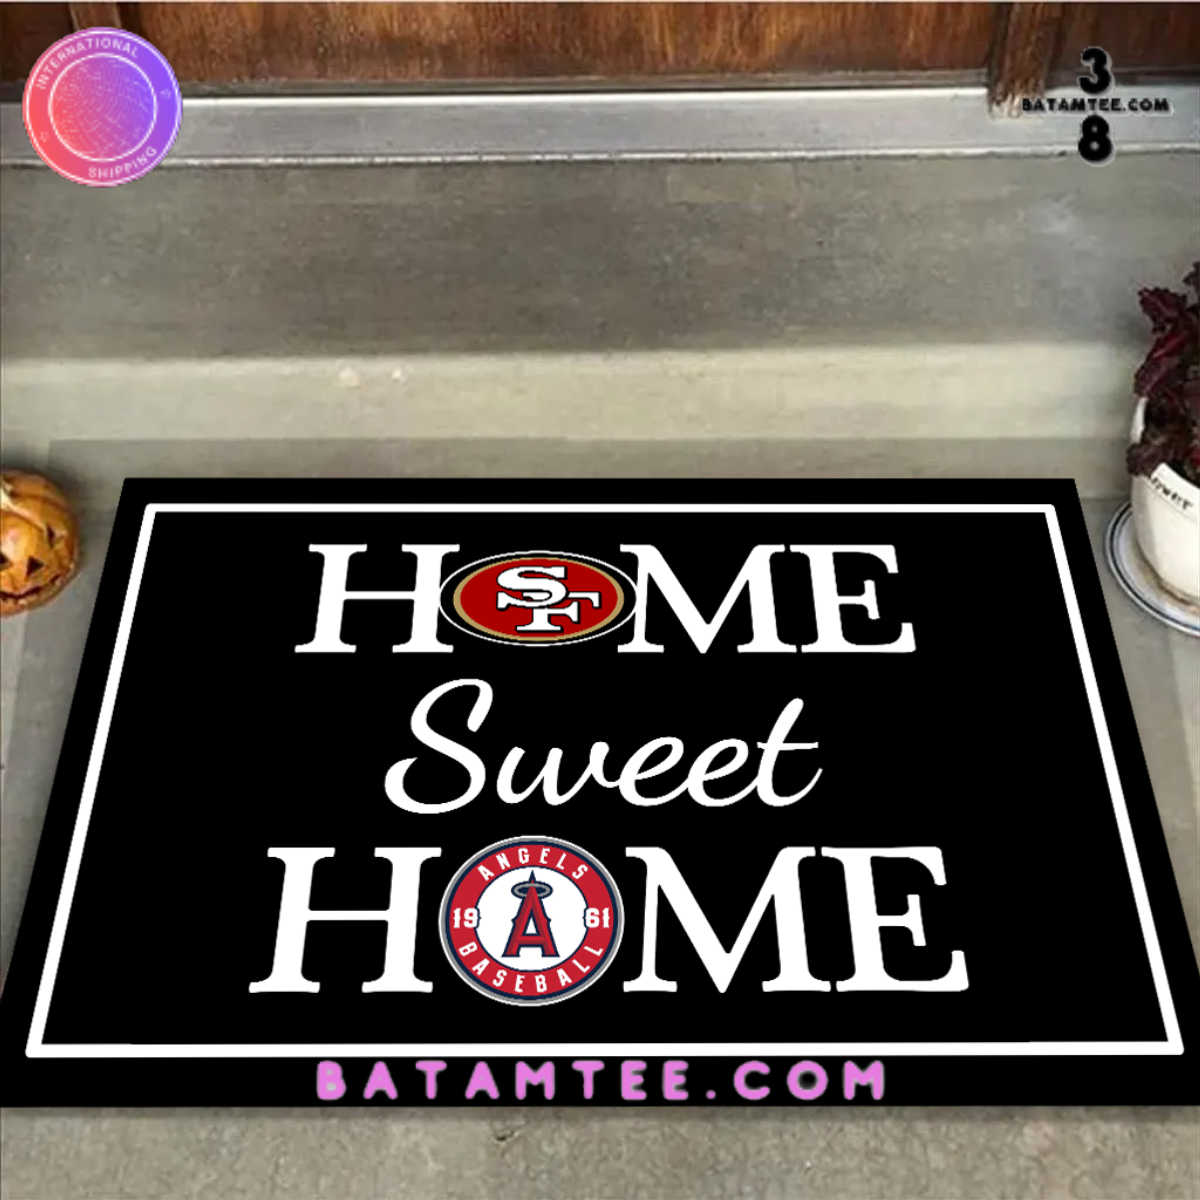 Home Sweet Home San Francisco 49ers And Angels Baseball Anti Slip Indoor Doormat's Overview - Batamtee Shop - Threads & Totes: Your Style Destination